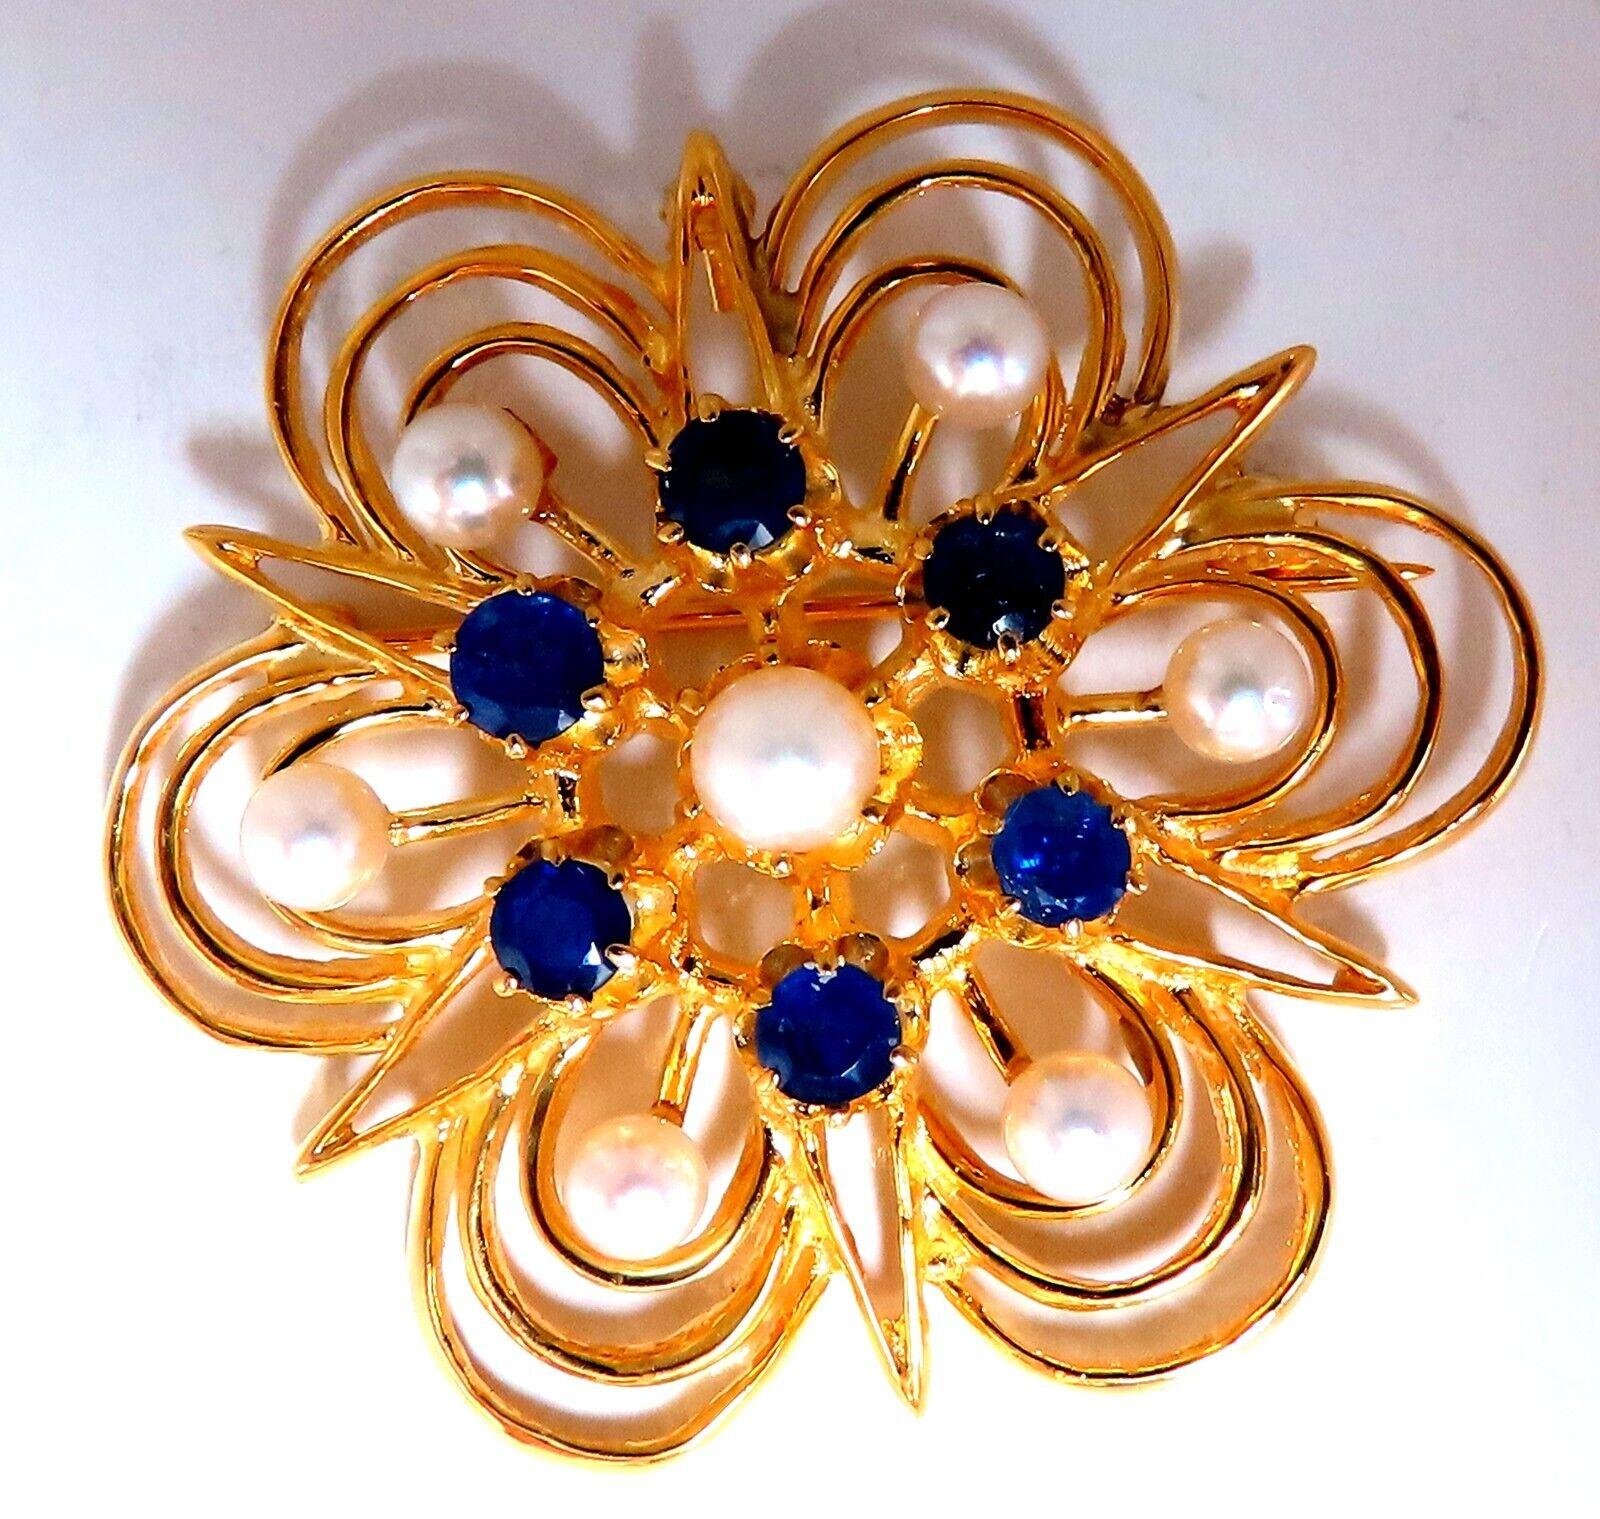 Cosmopolitan Deco Pin

Very Well Made



.70ct natural sapphires

7 Cultured Pearls

3-4 mm

37 x 34mm

14kt. yellow gold 

9.9 Grams.